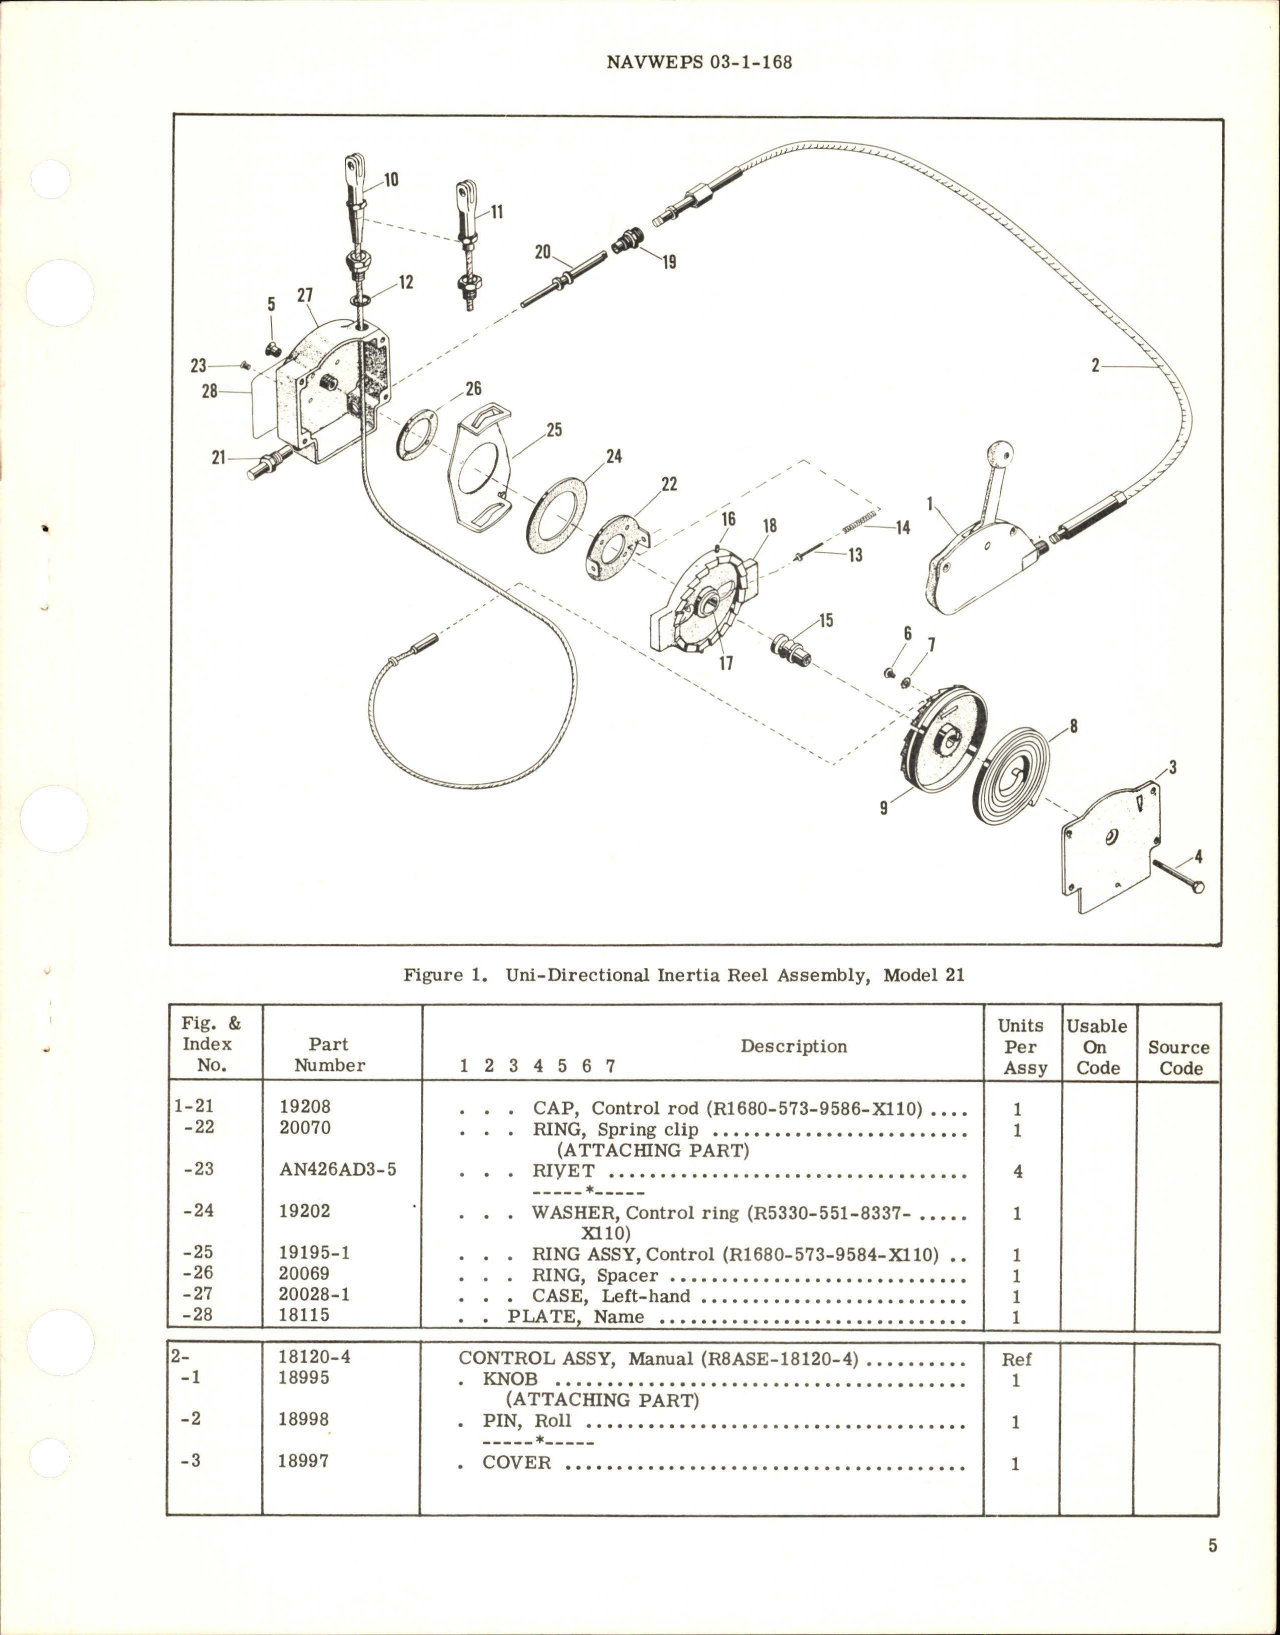 Sample page 5 from AirCorps Library document: Overhaul Instructions with Illustrated Parts Breakdown for Uni-Directional Inertia Reel Assembly - Model 21